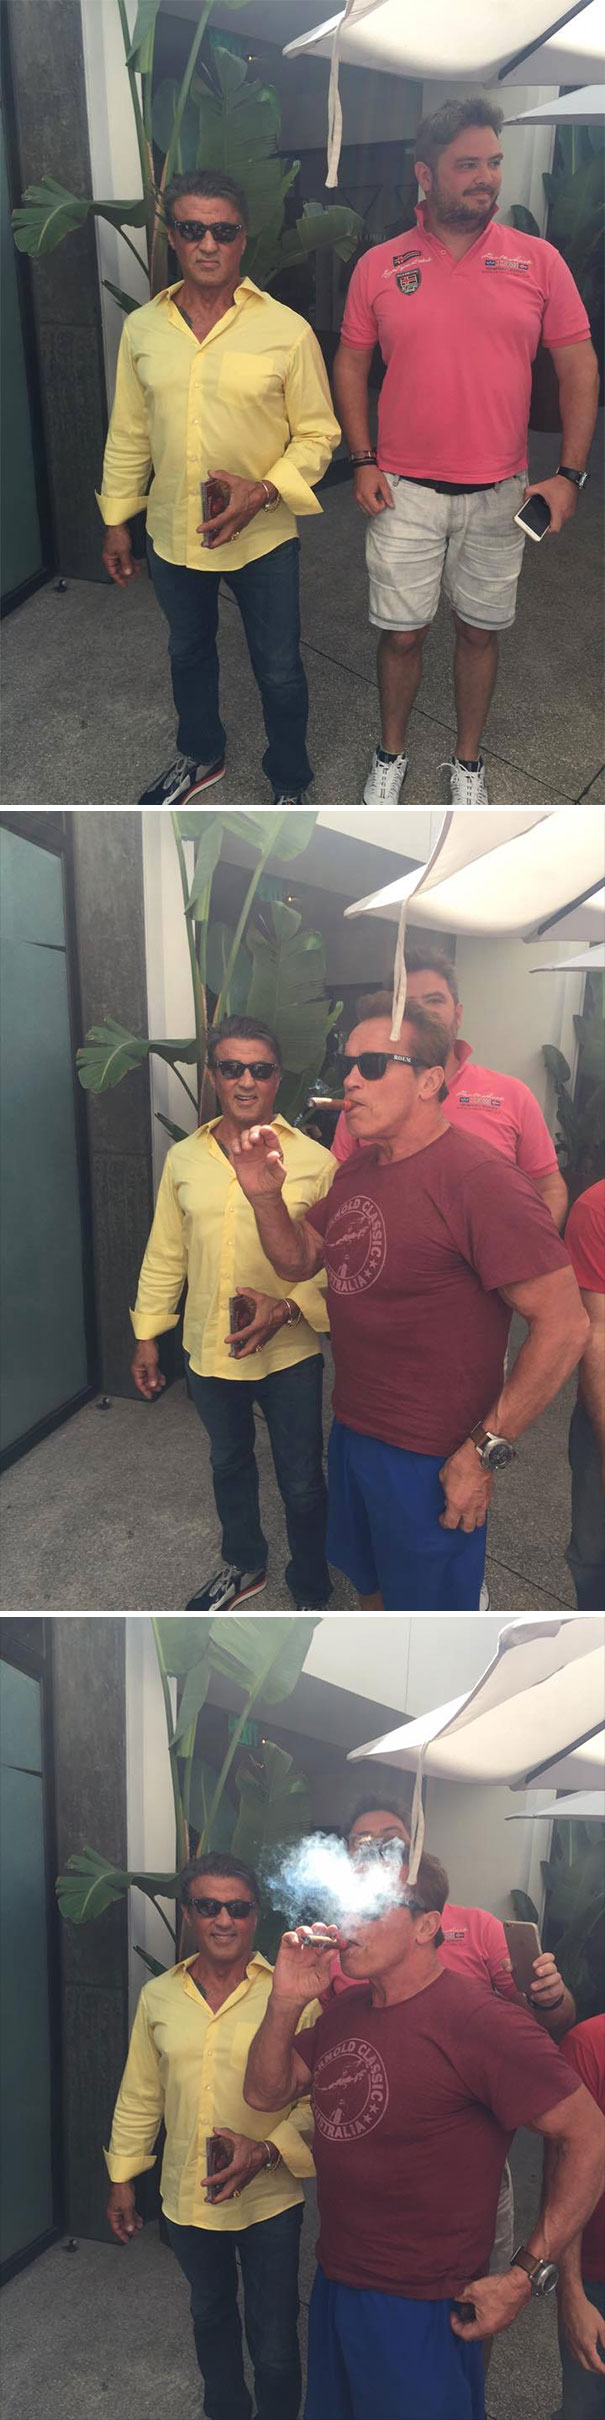 Funny Celebrity Photobombs - Arnold Spoiled The Fan Photo With Sylvester